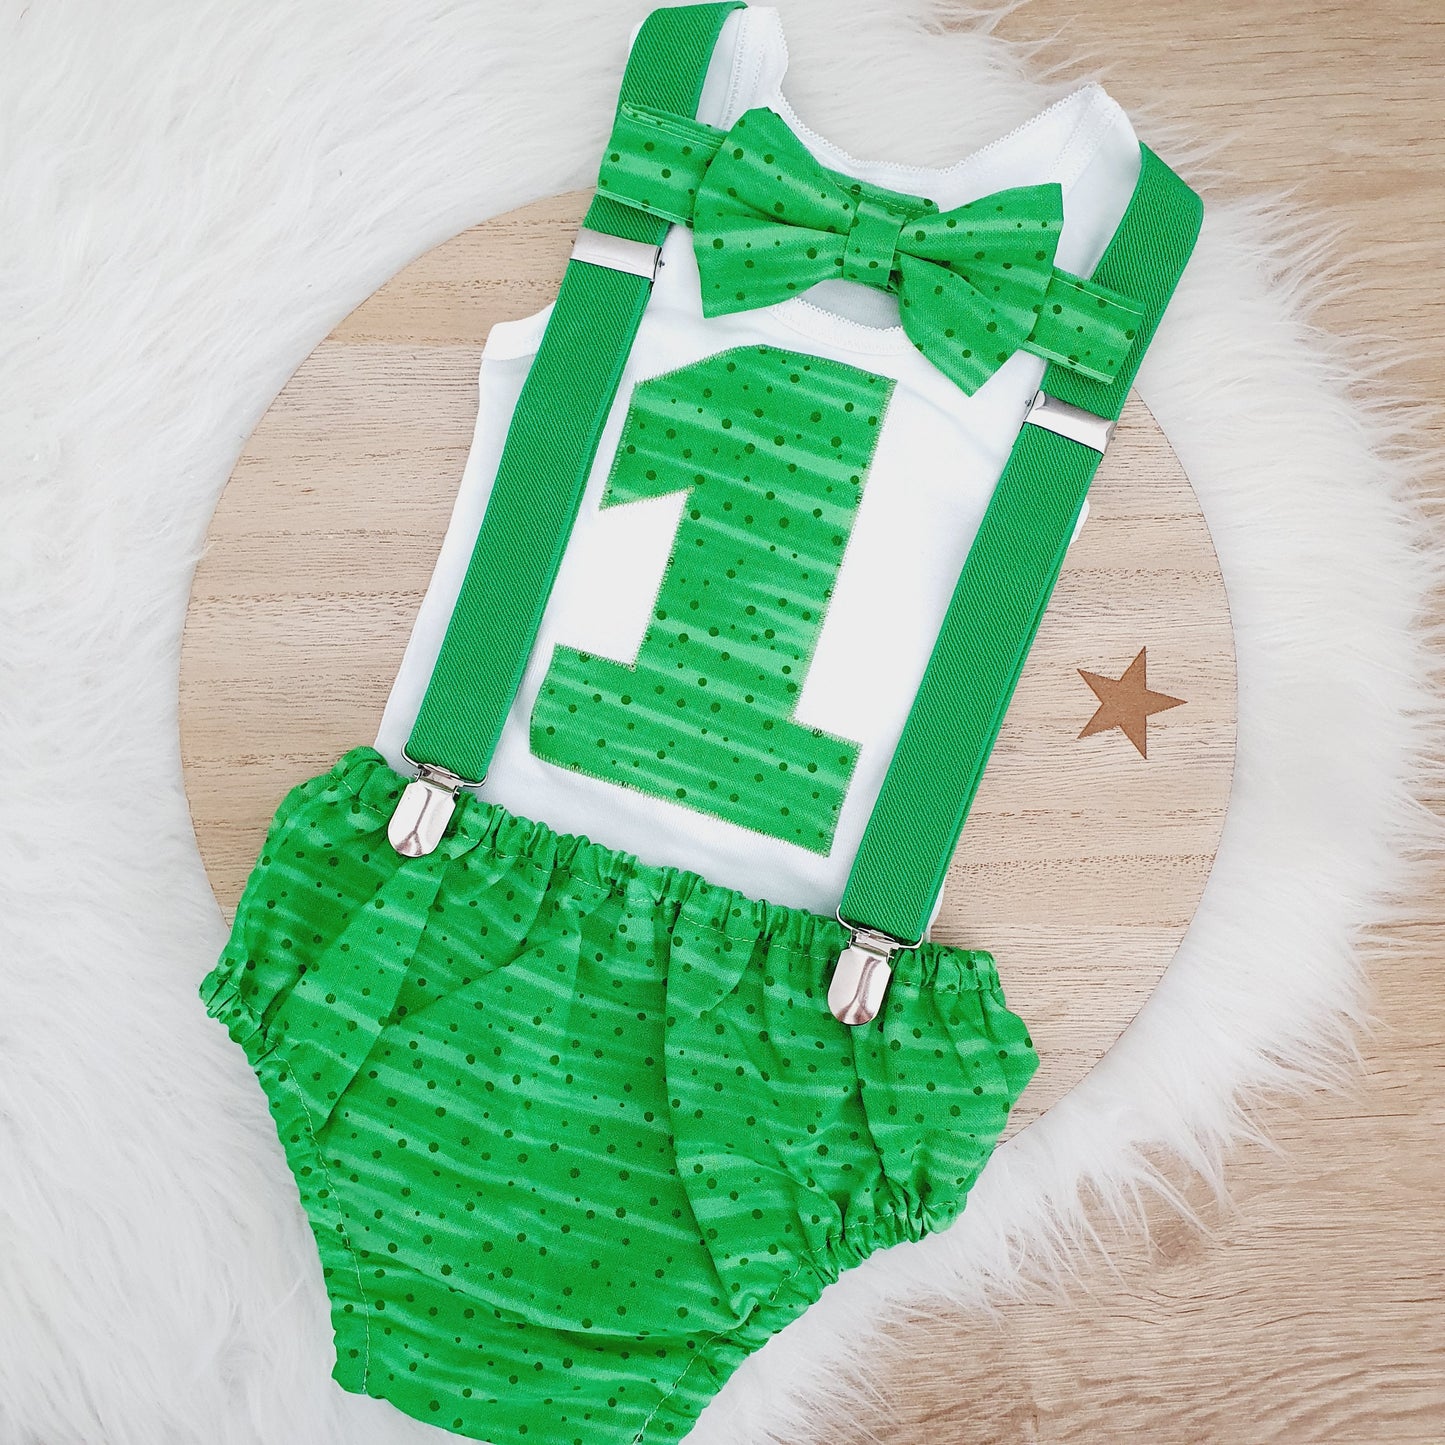 Green Boys 1st Birthday Outfit - Cake Smash Outfit - Baby Boys First Birthday Photoshoot Clothing - Size 0, Nappy Cover, Tie, Suspenders & Singlet Set - GREEN